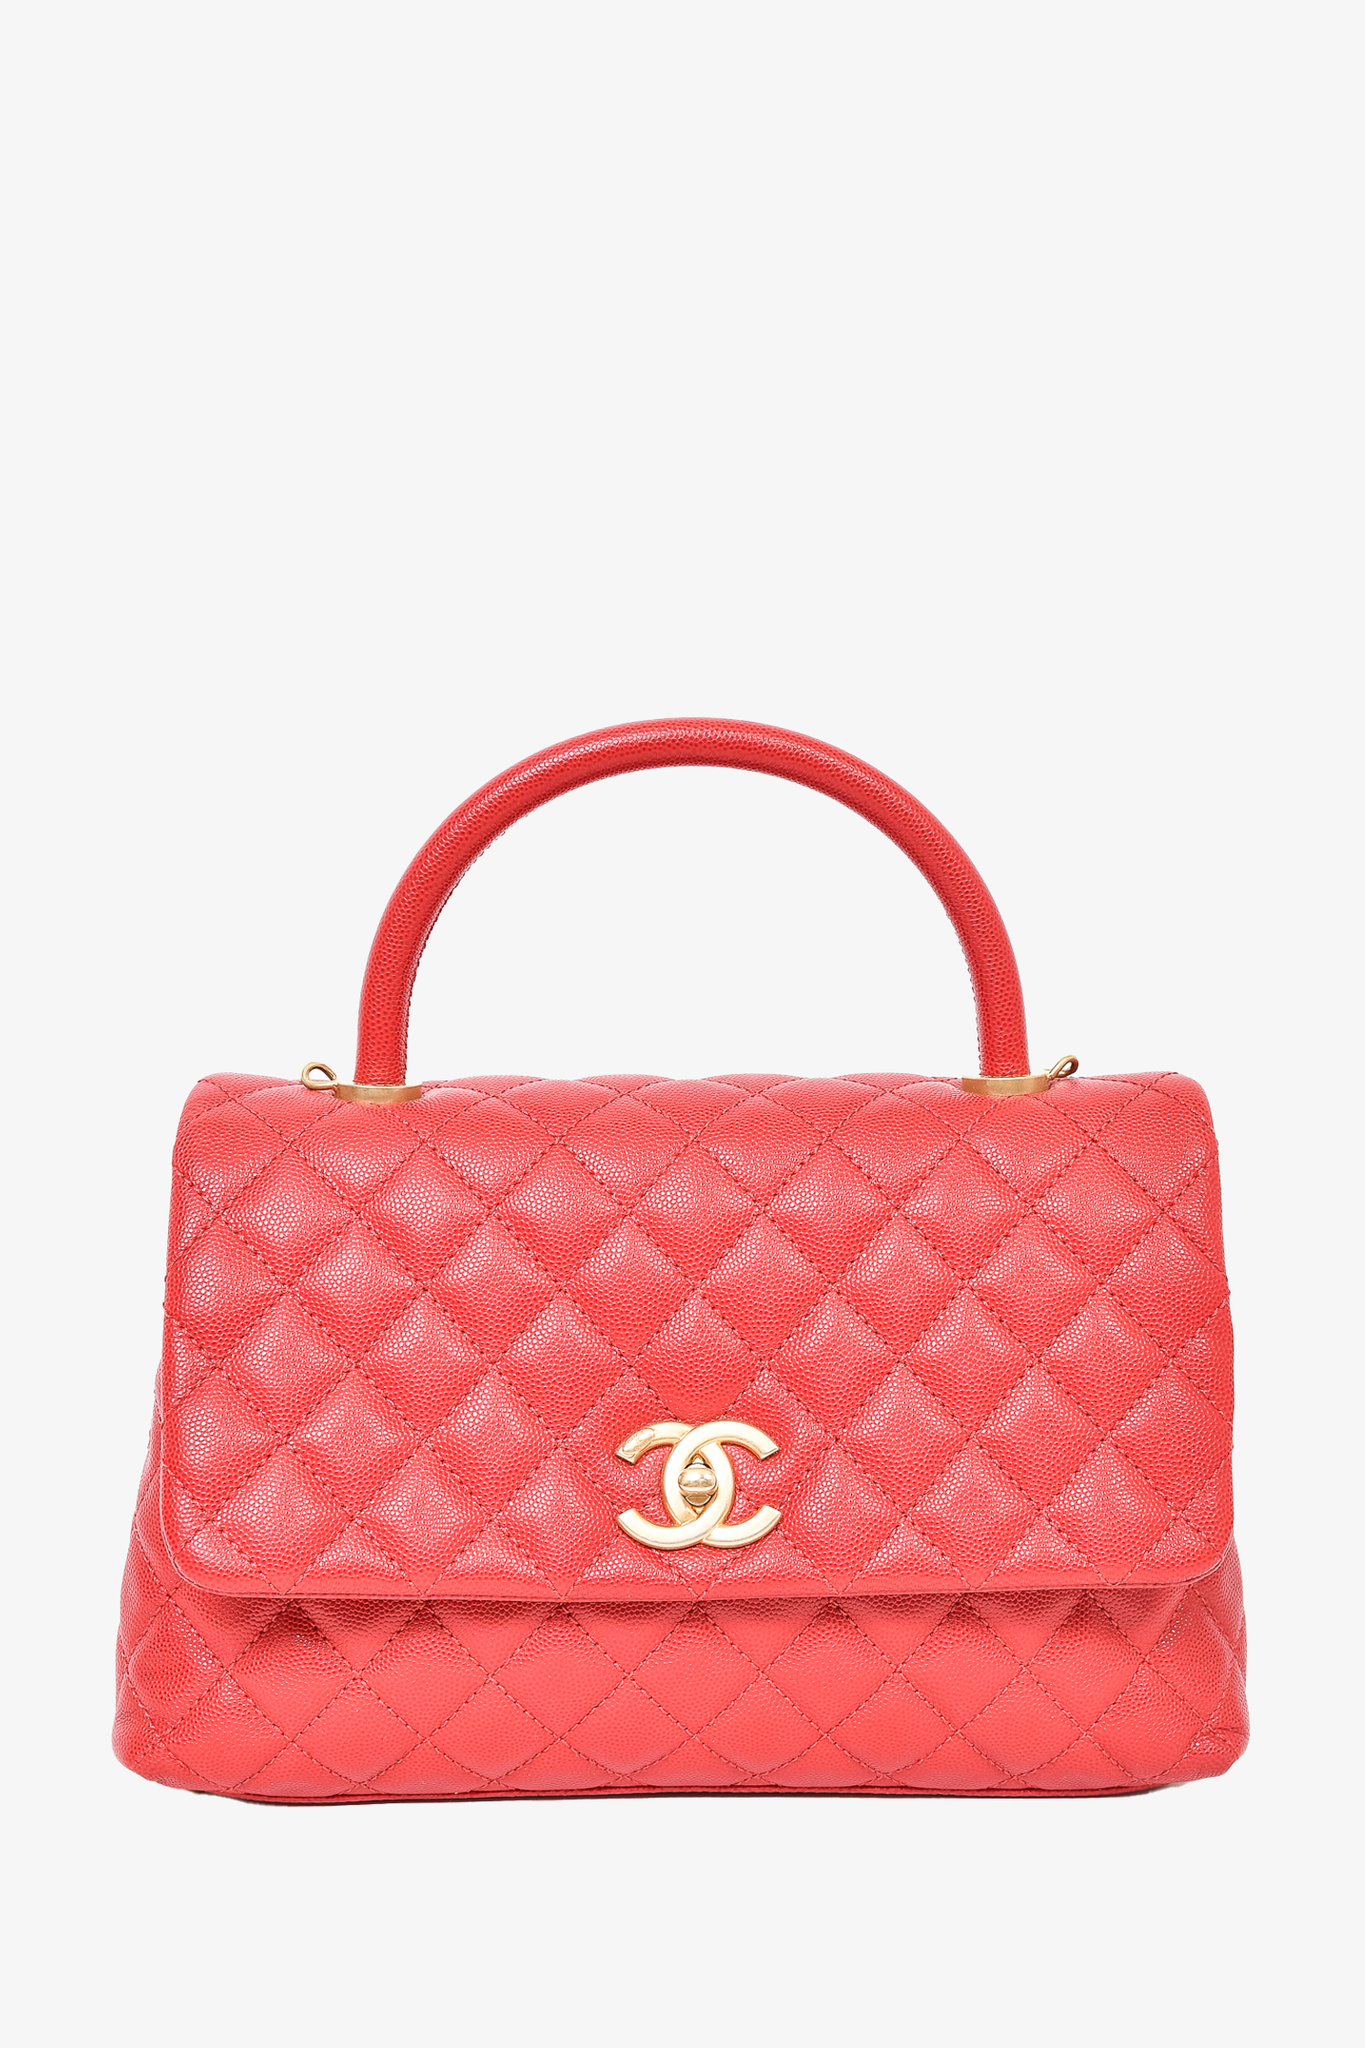 Chanel 2017/18 Red Caviar Leather Small Coco Top Handle